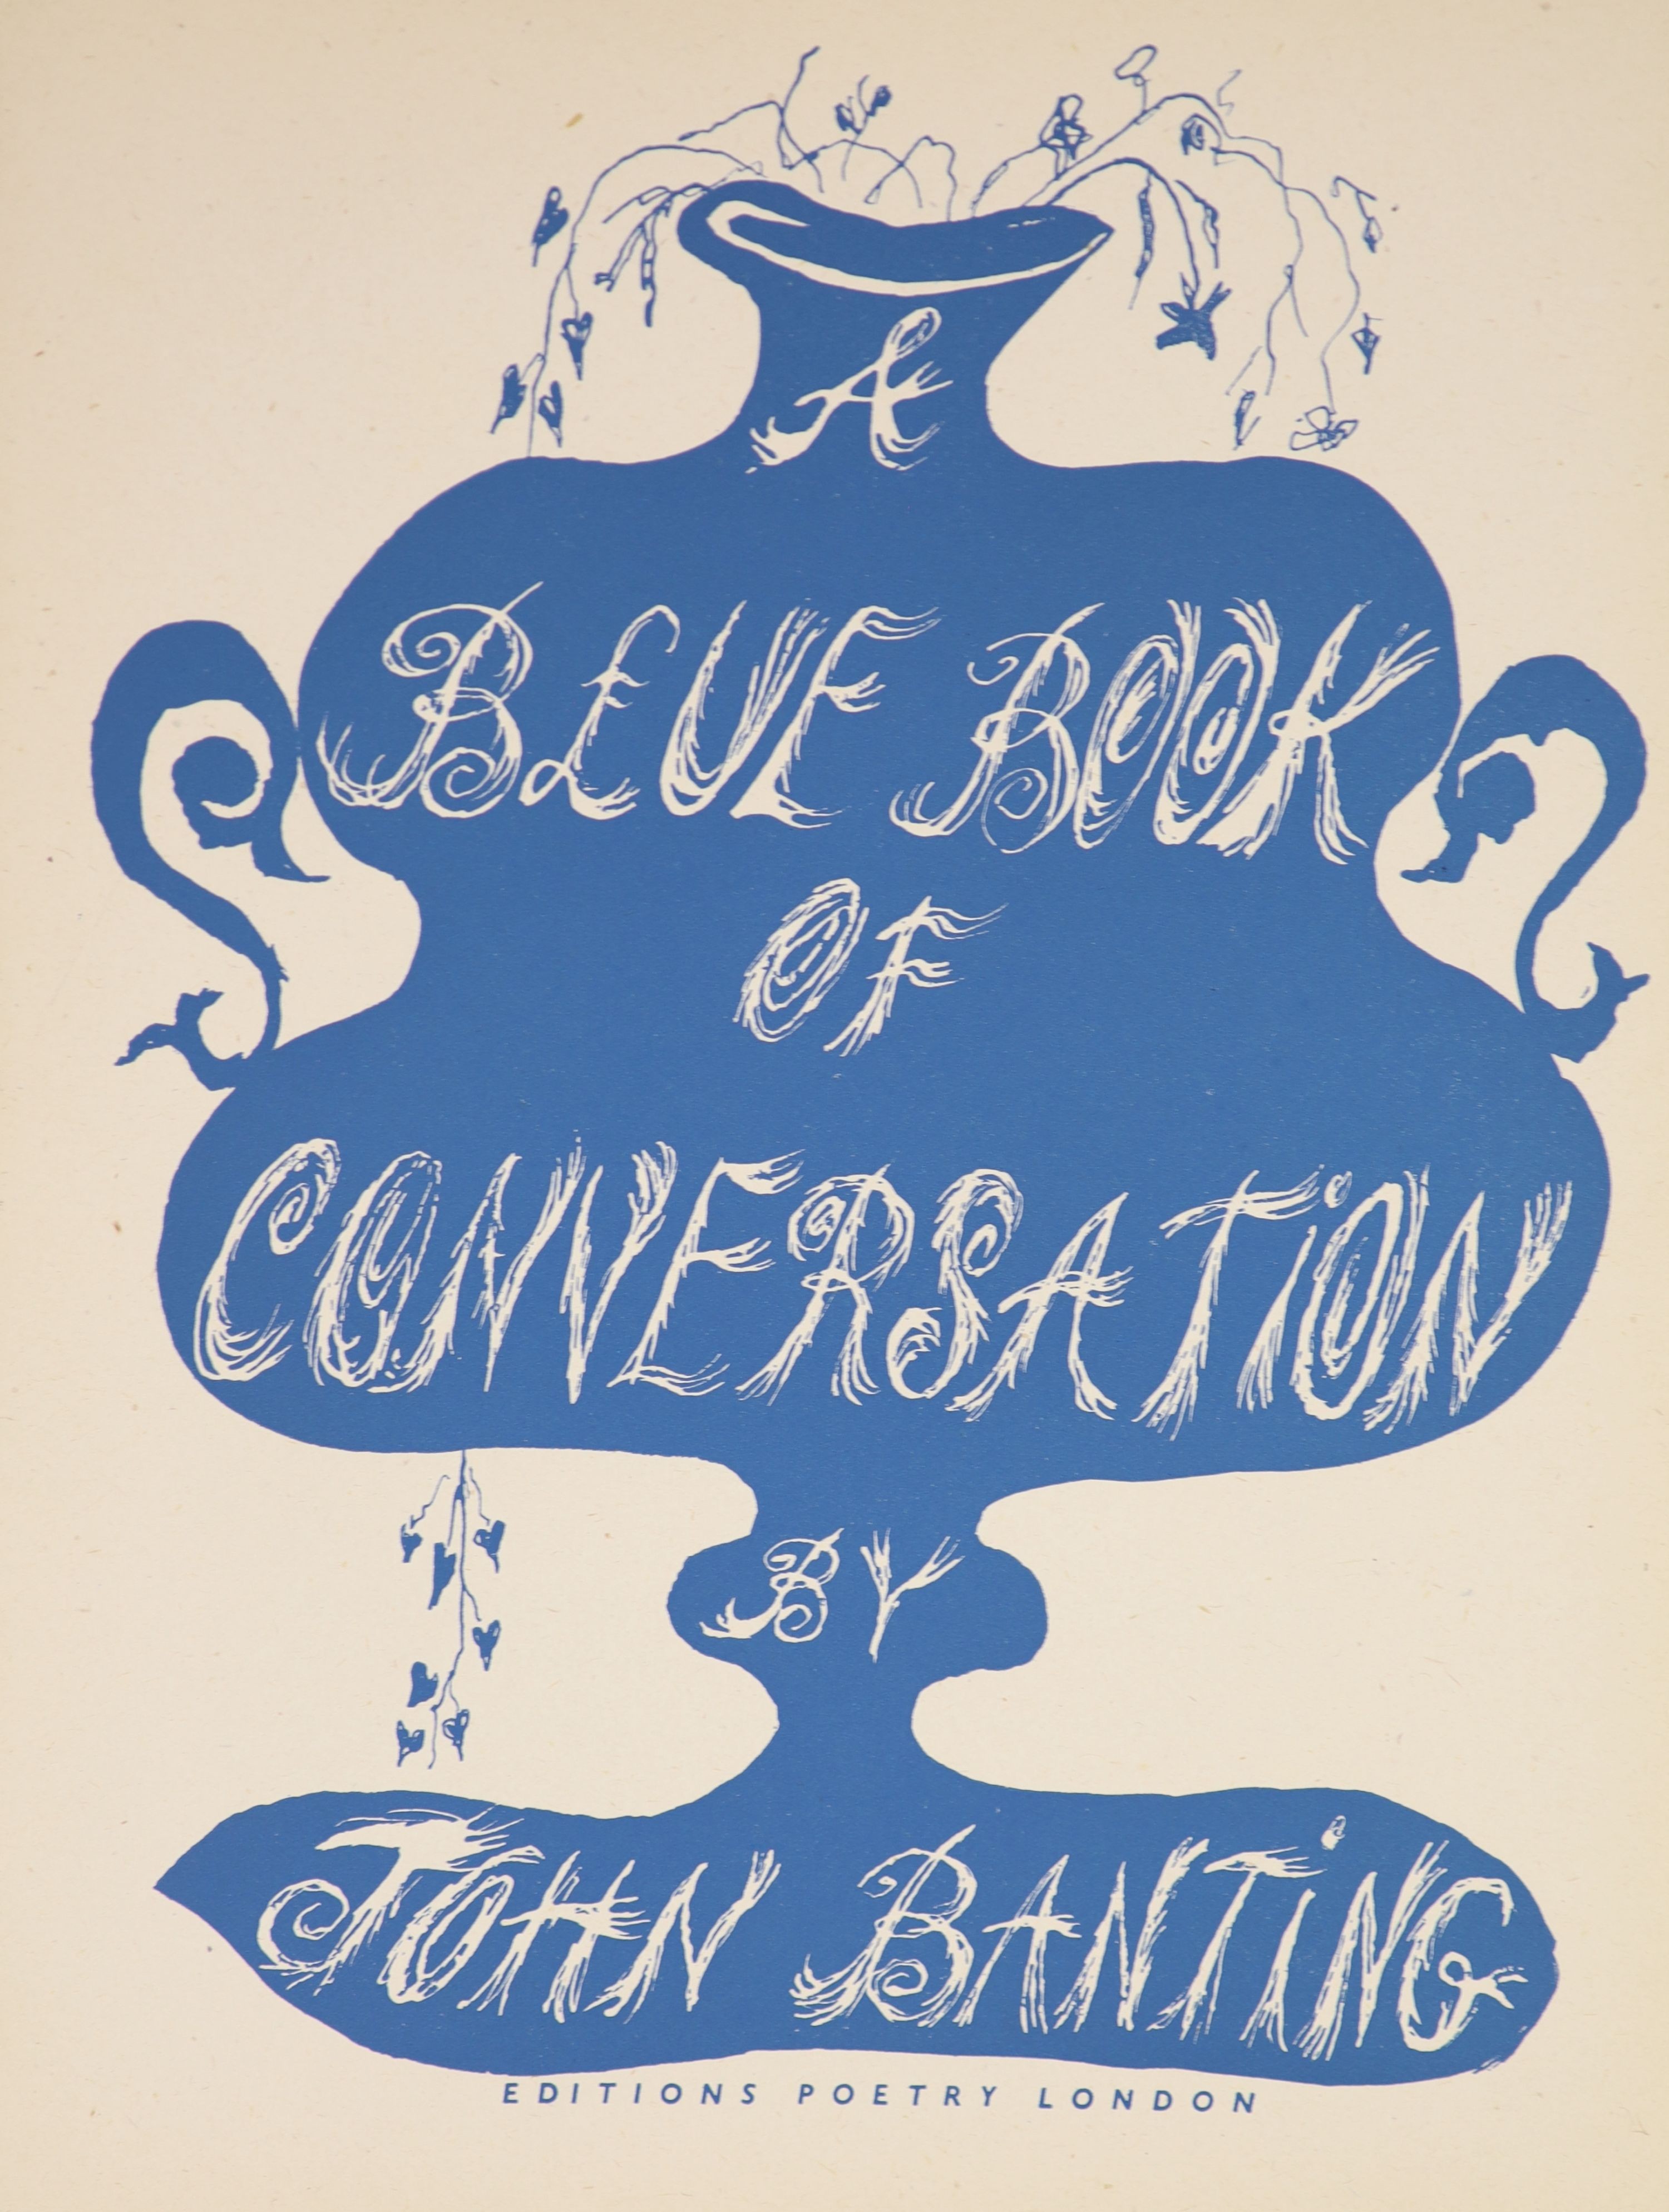 Banting, John - A Blue Book of Conversation, 1st edition, original blue cloth, with unclipped d/j, title page and 26 cyanotype illustrations by the author, Editions Poetry, London, 1946